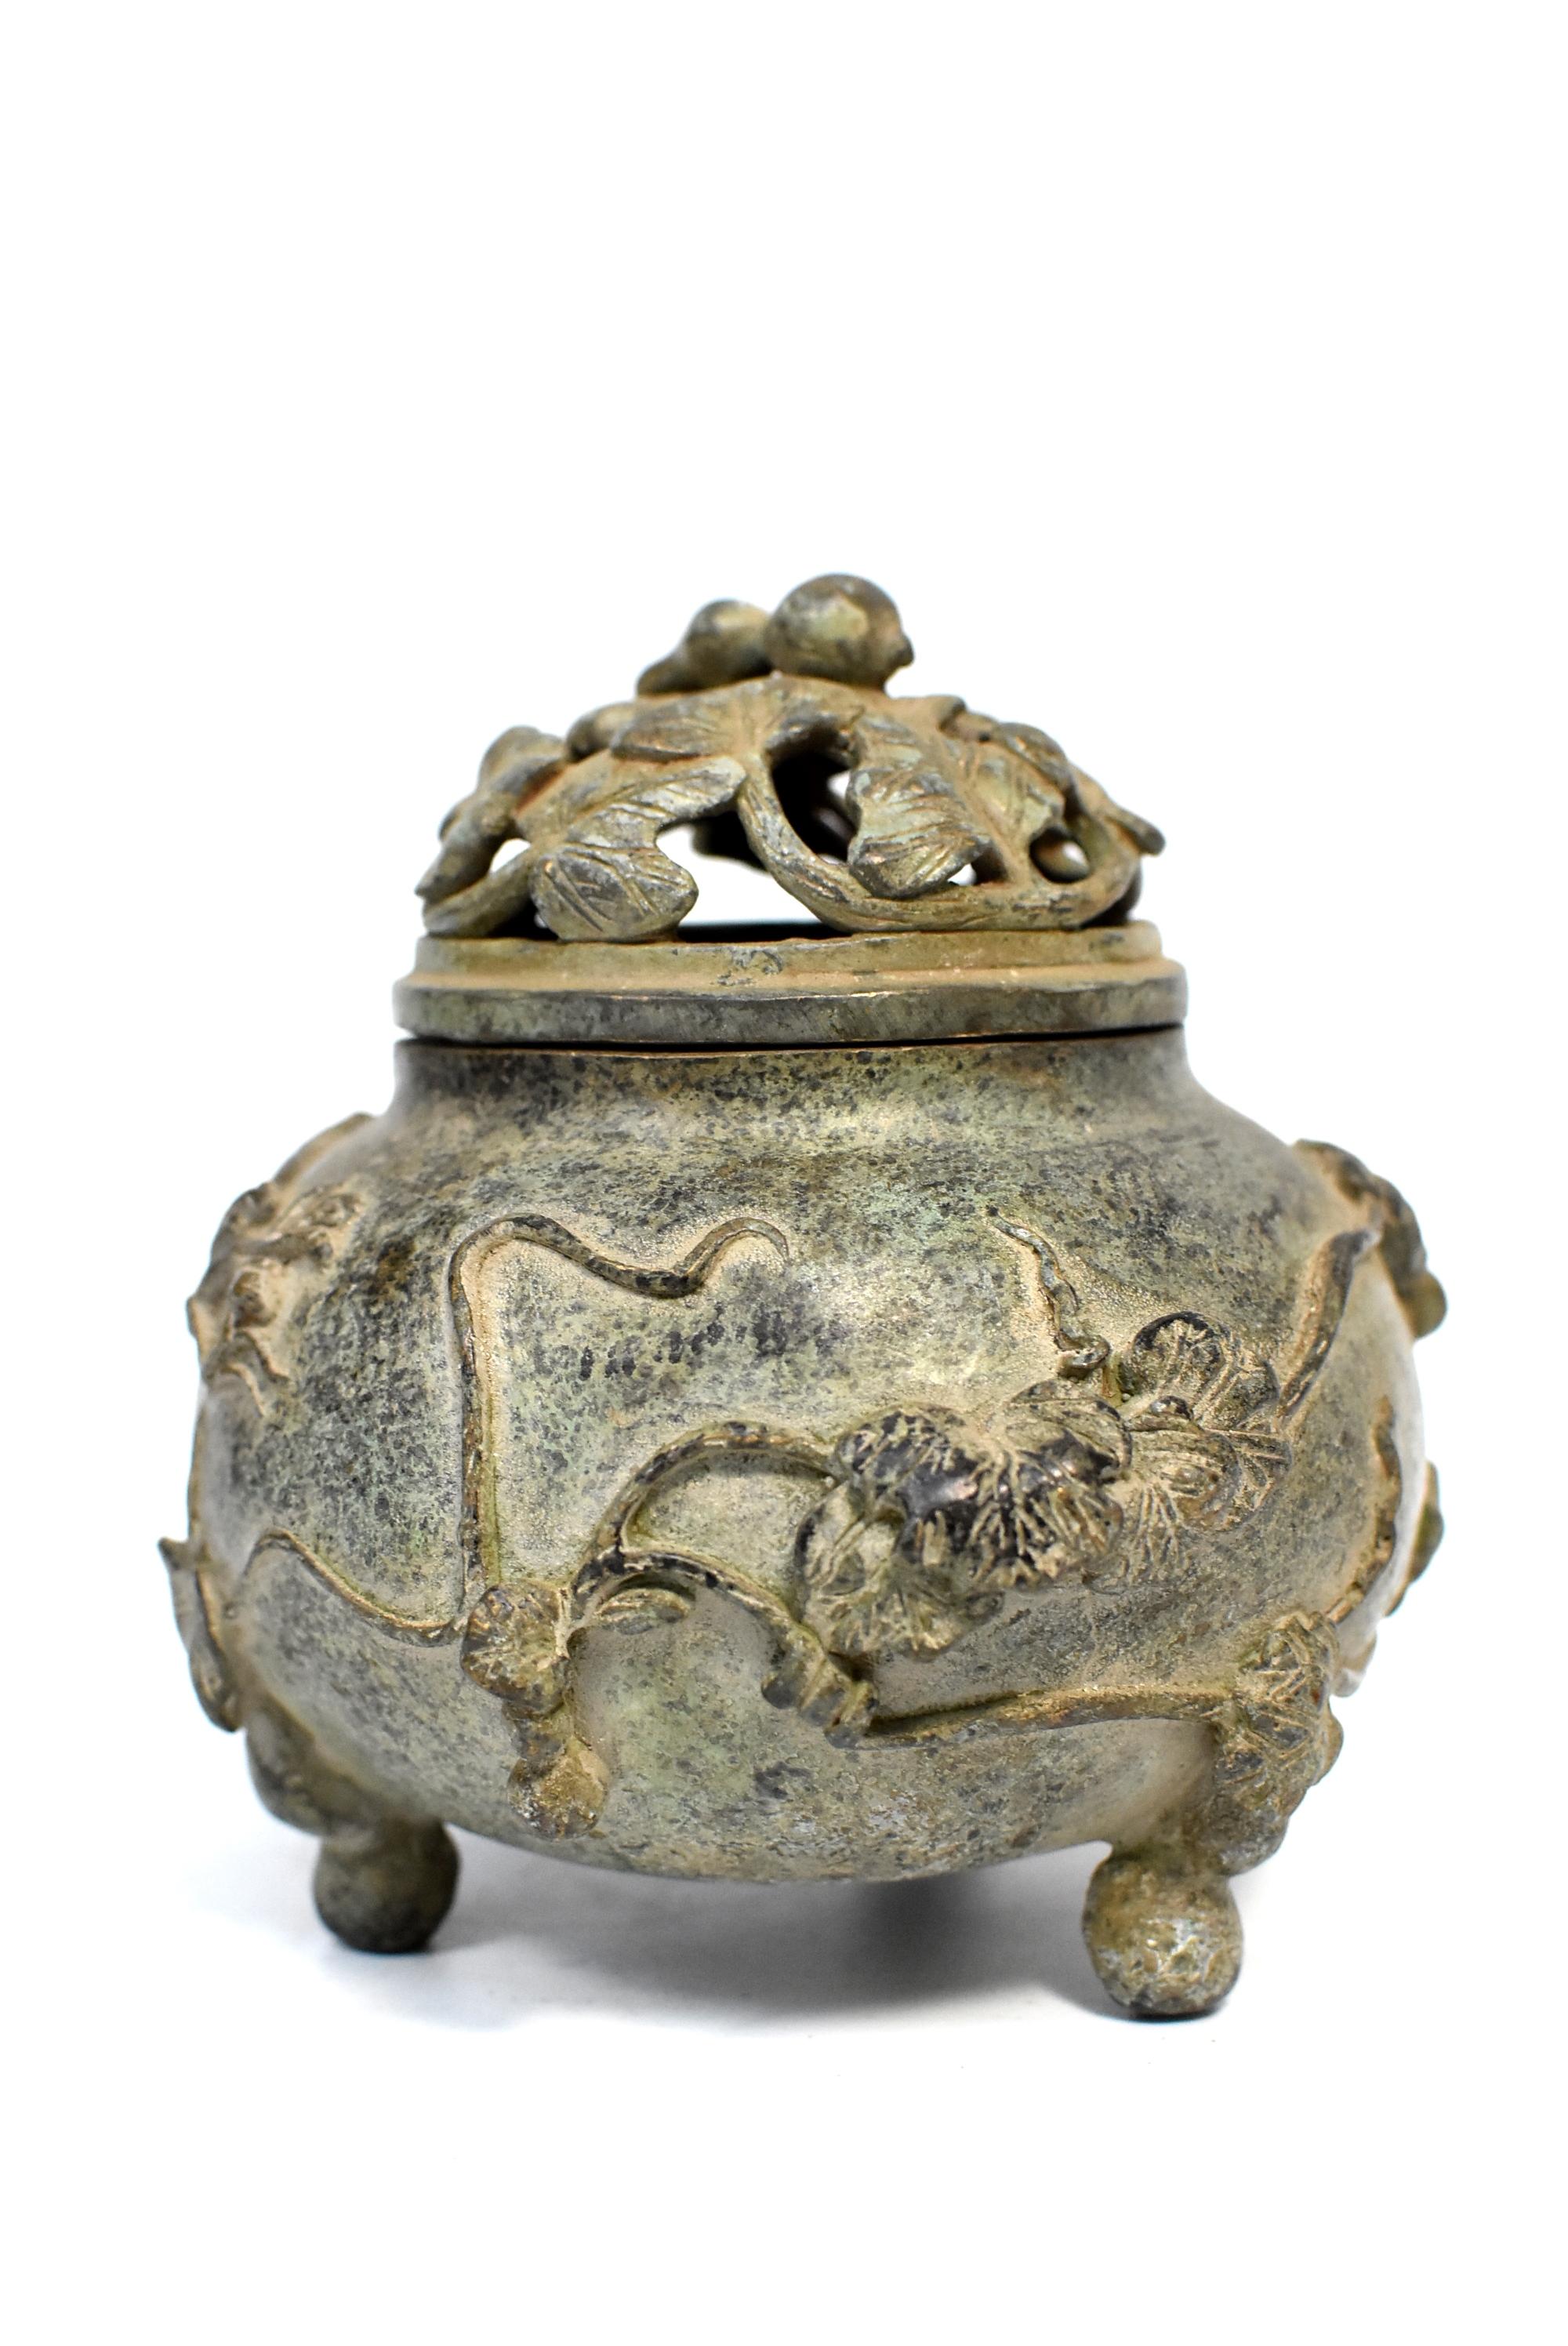 A beautiful Chinese antique bronze incense burner featuring the elegant gourd form. The vine is found on the lid and the body of the burner. A gourd is used as a finial. 3-foot design makes the burner stable. Signed and stamped.